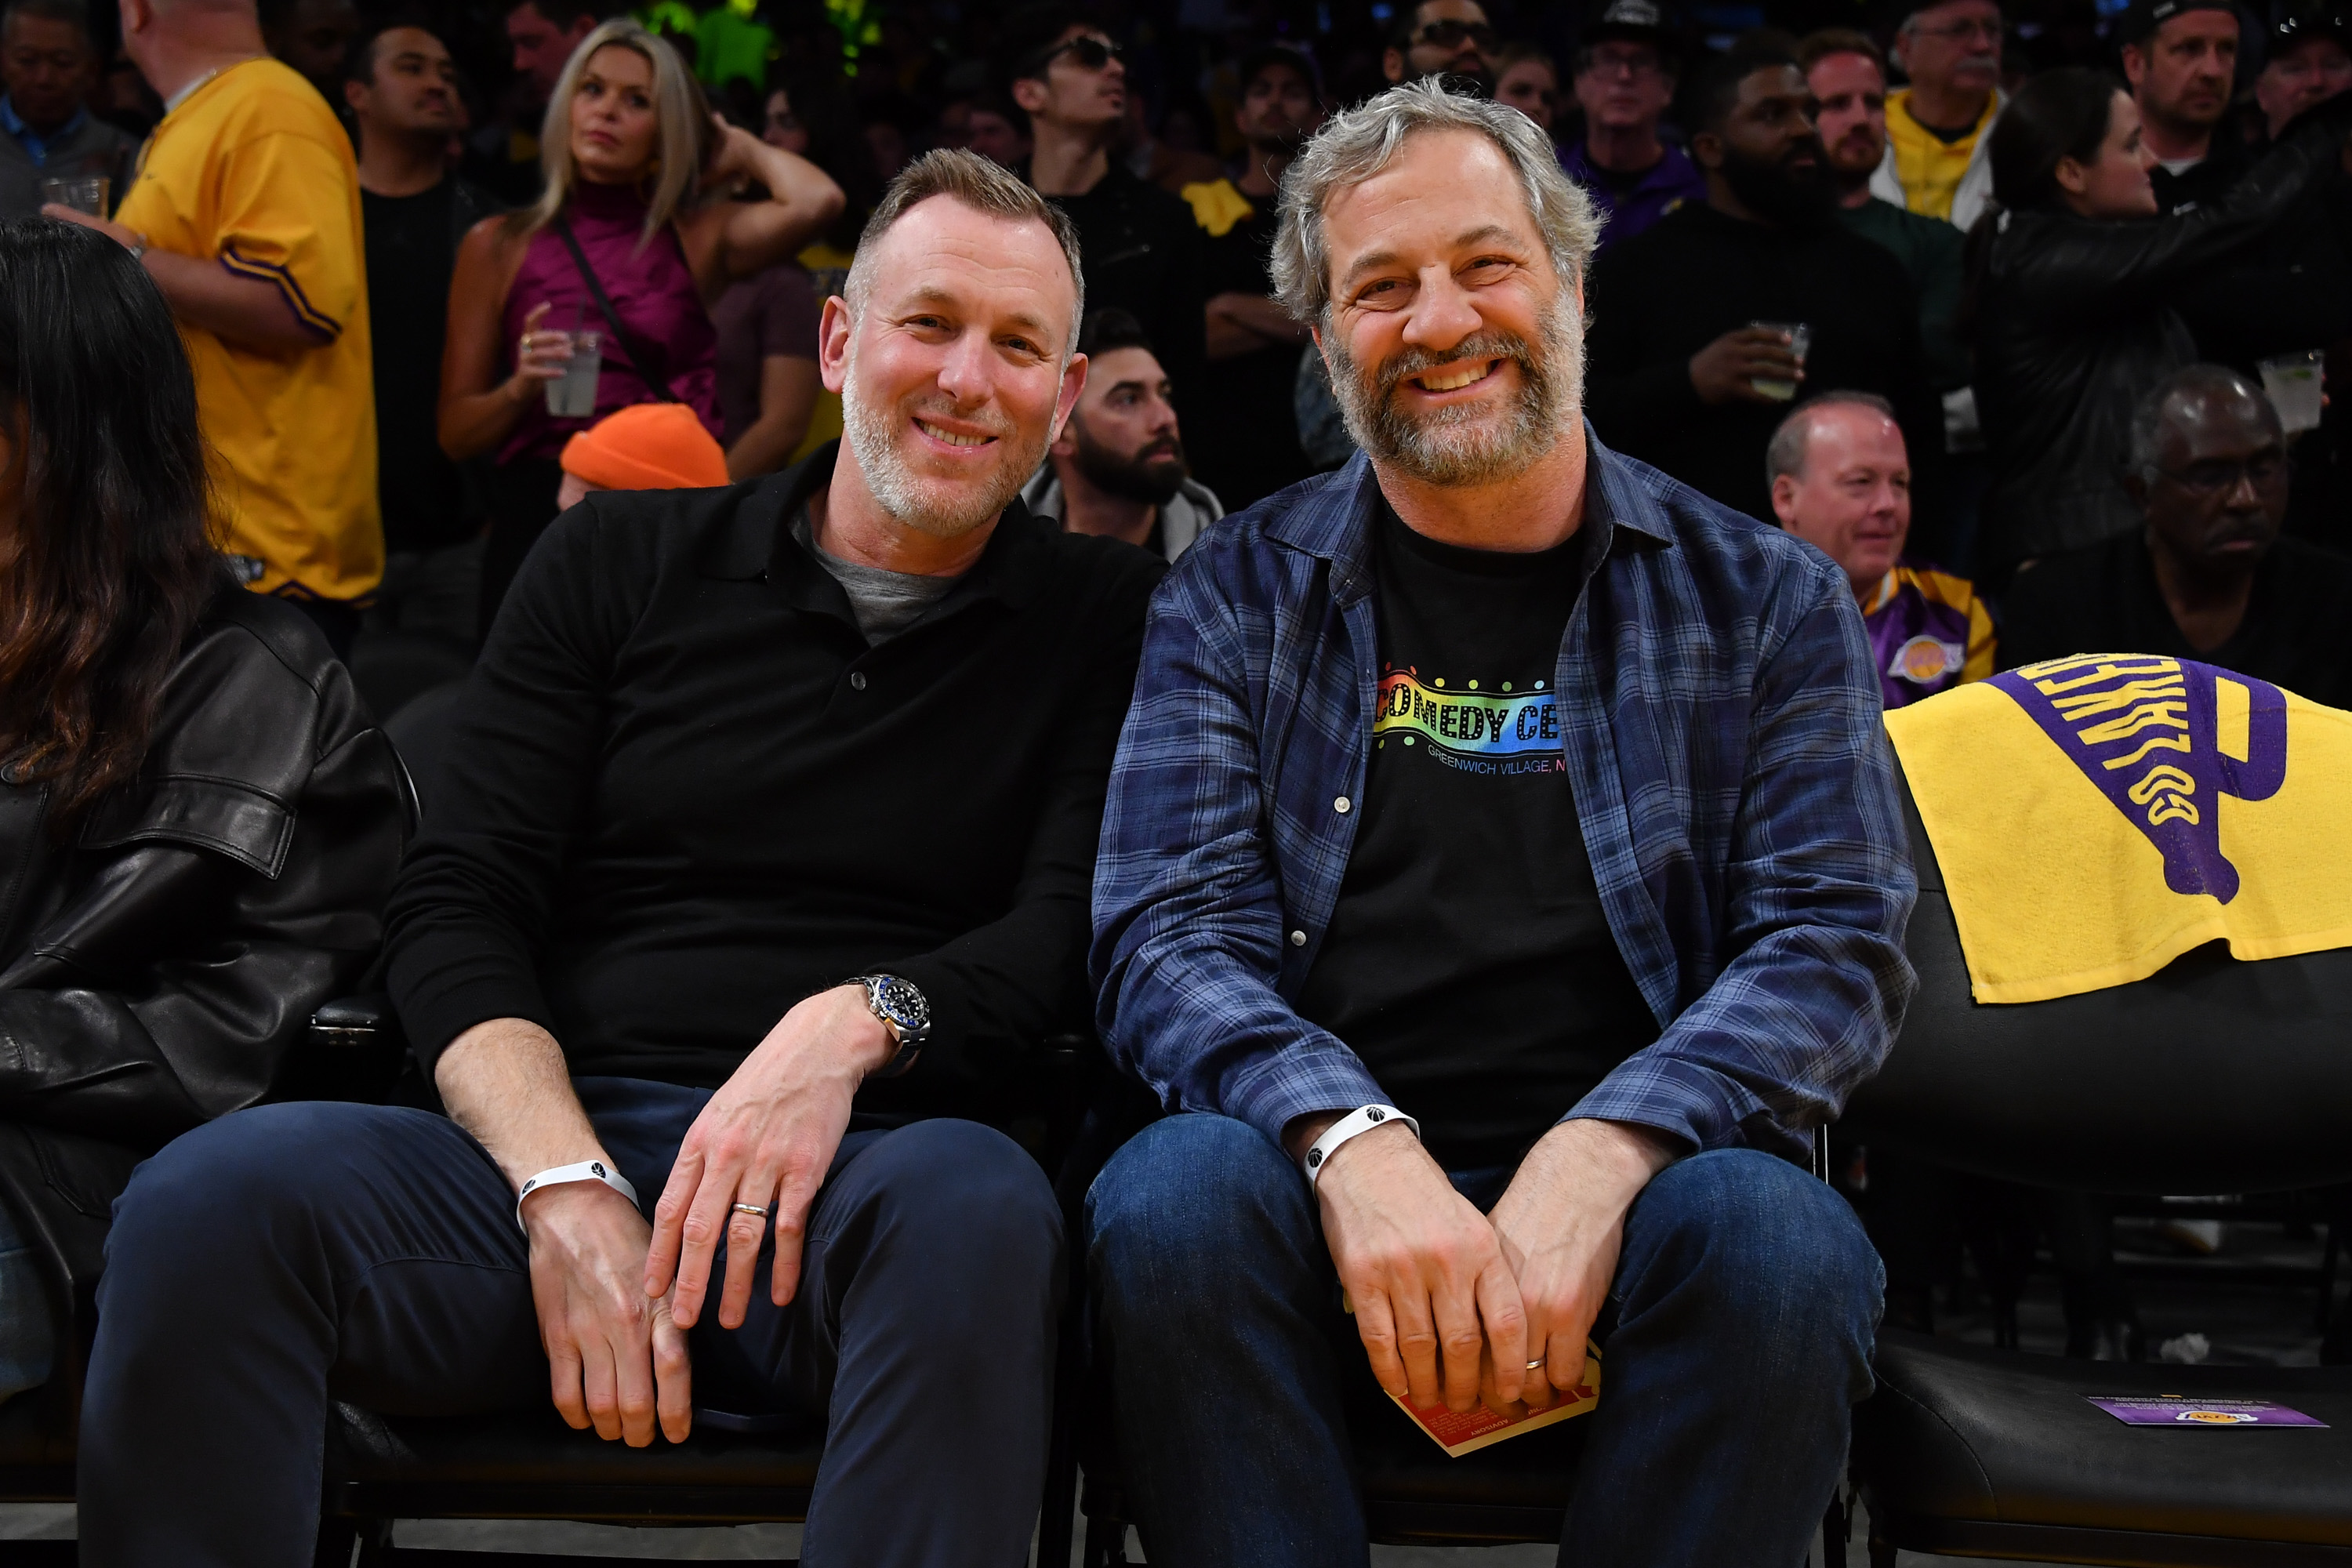 Judd Apatow (R) attends a playoff basketball game between the Los Angeles Lakers and the Golden State Warriors.